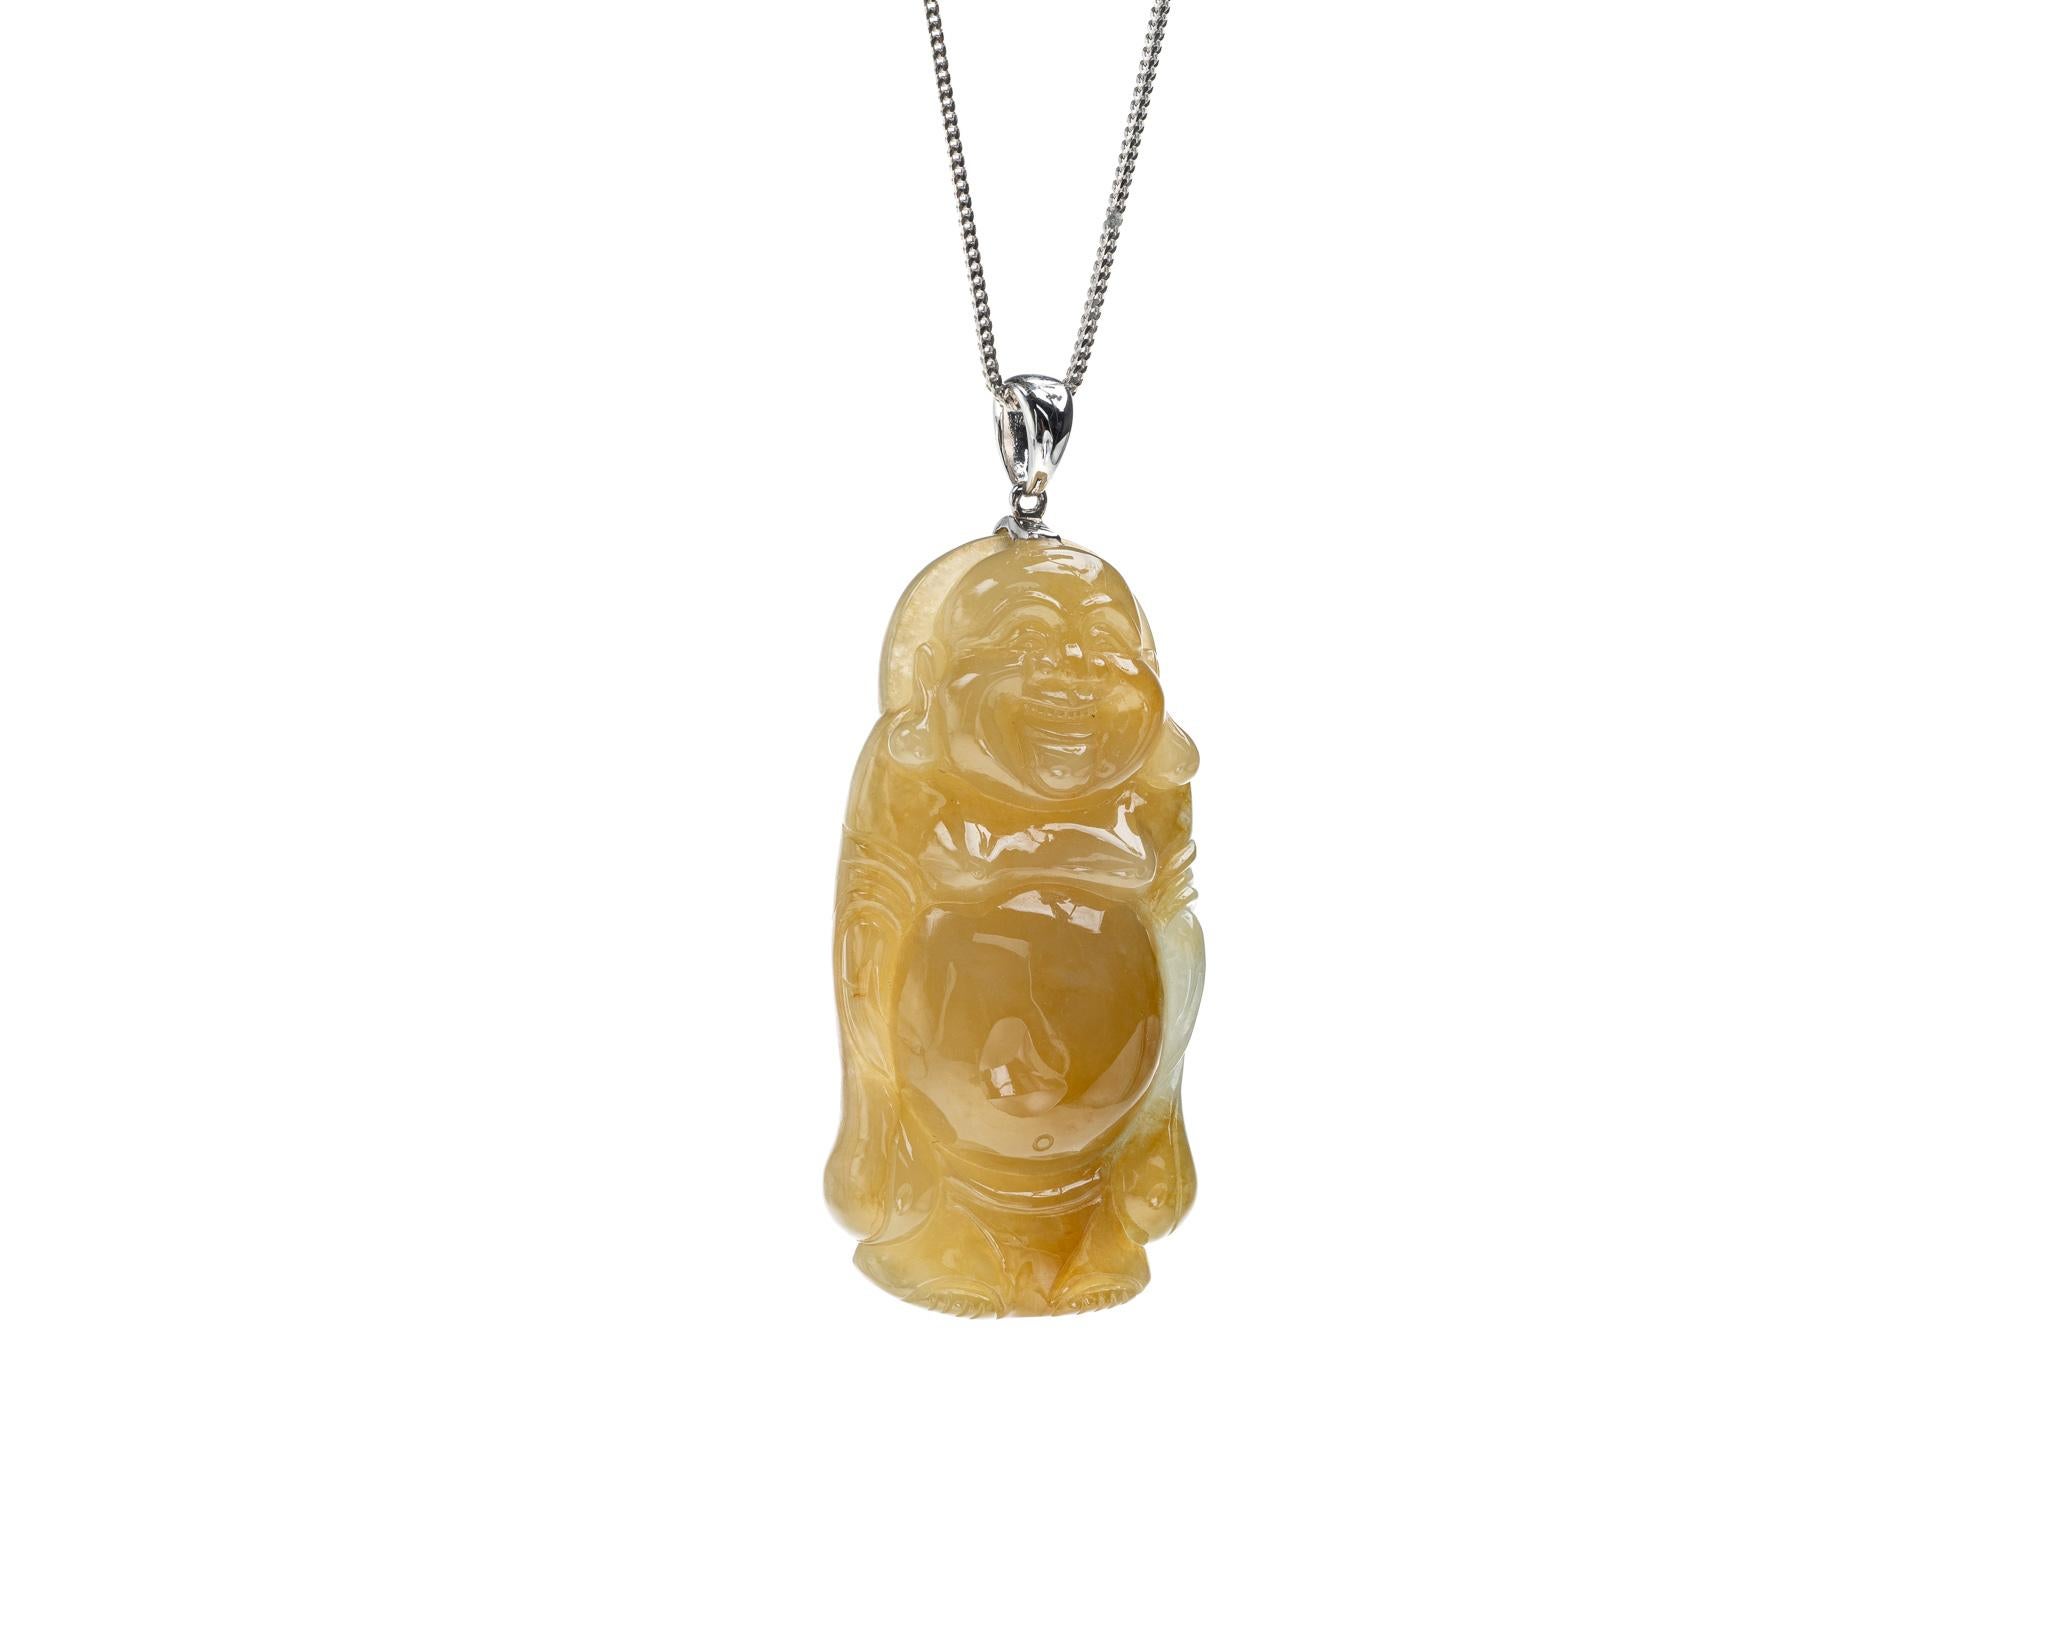 This is an all natural, untreated jadeite jade carved standing happy buddha and set on an 18K white gold bail.  The carved standing happy buddha symbolizes happiness, compassion and protection.    

It measures 2.06 inches (52.5 mm) x 0.96 inches